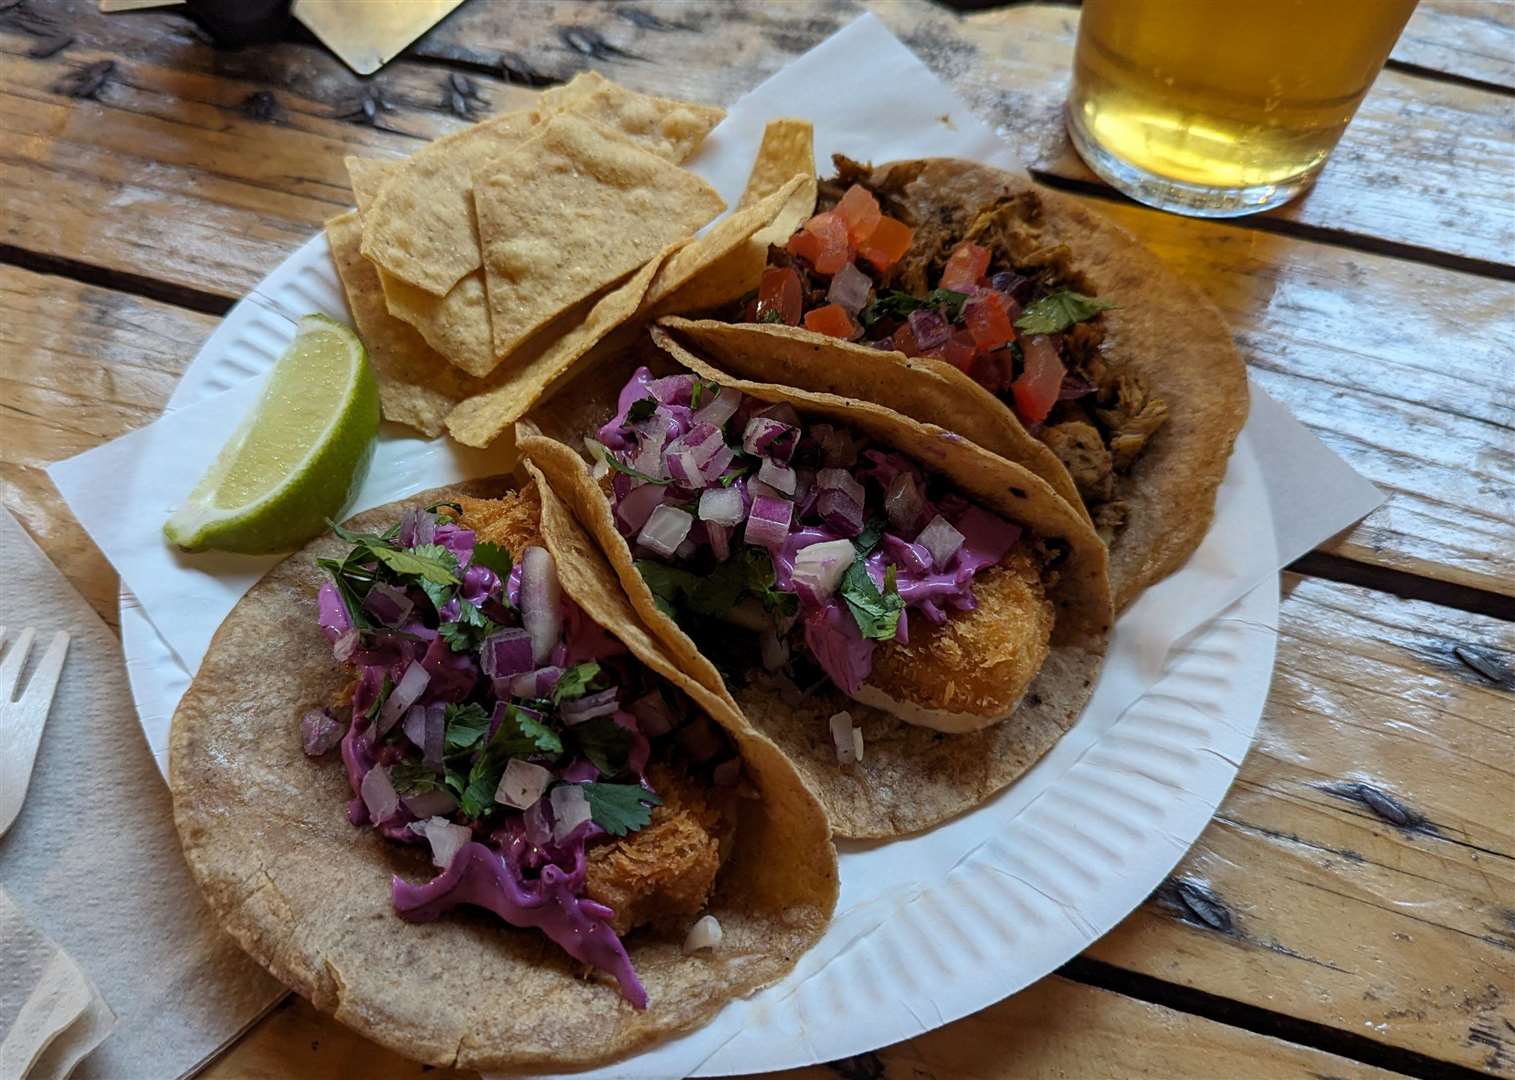 A trio of tacos at Unit 1 – two shrimp and one chicken